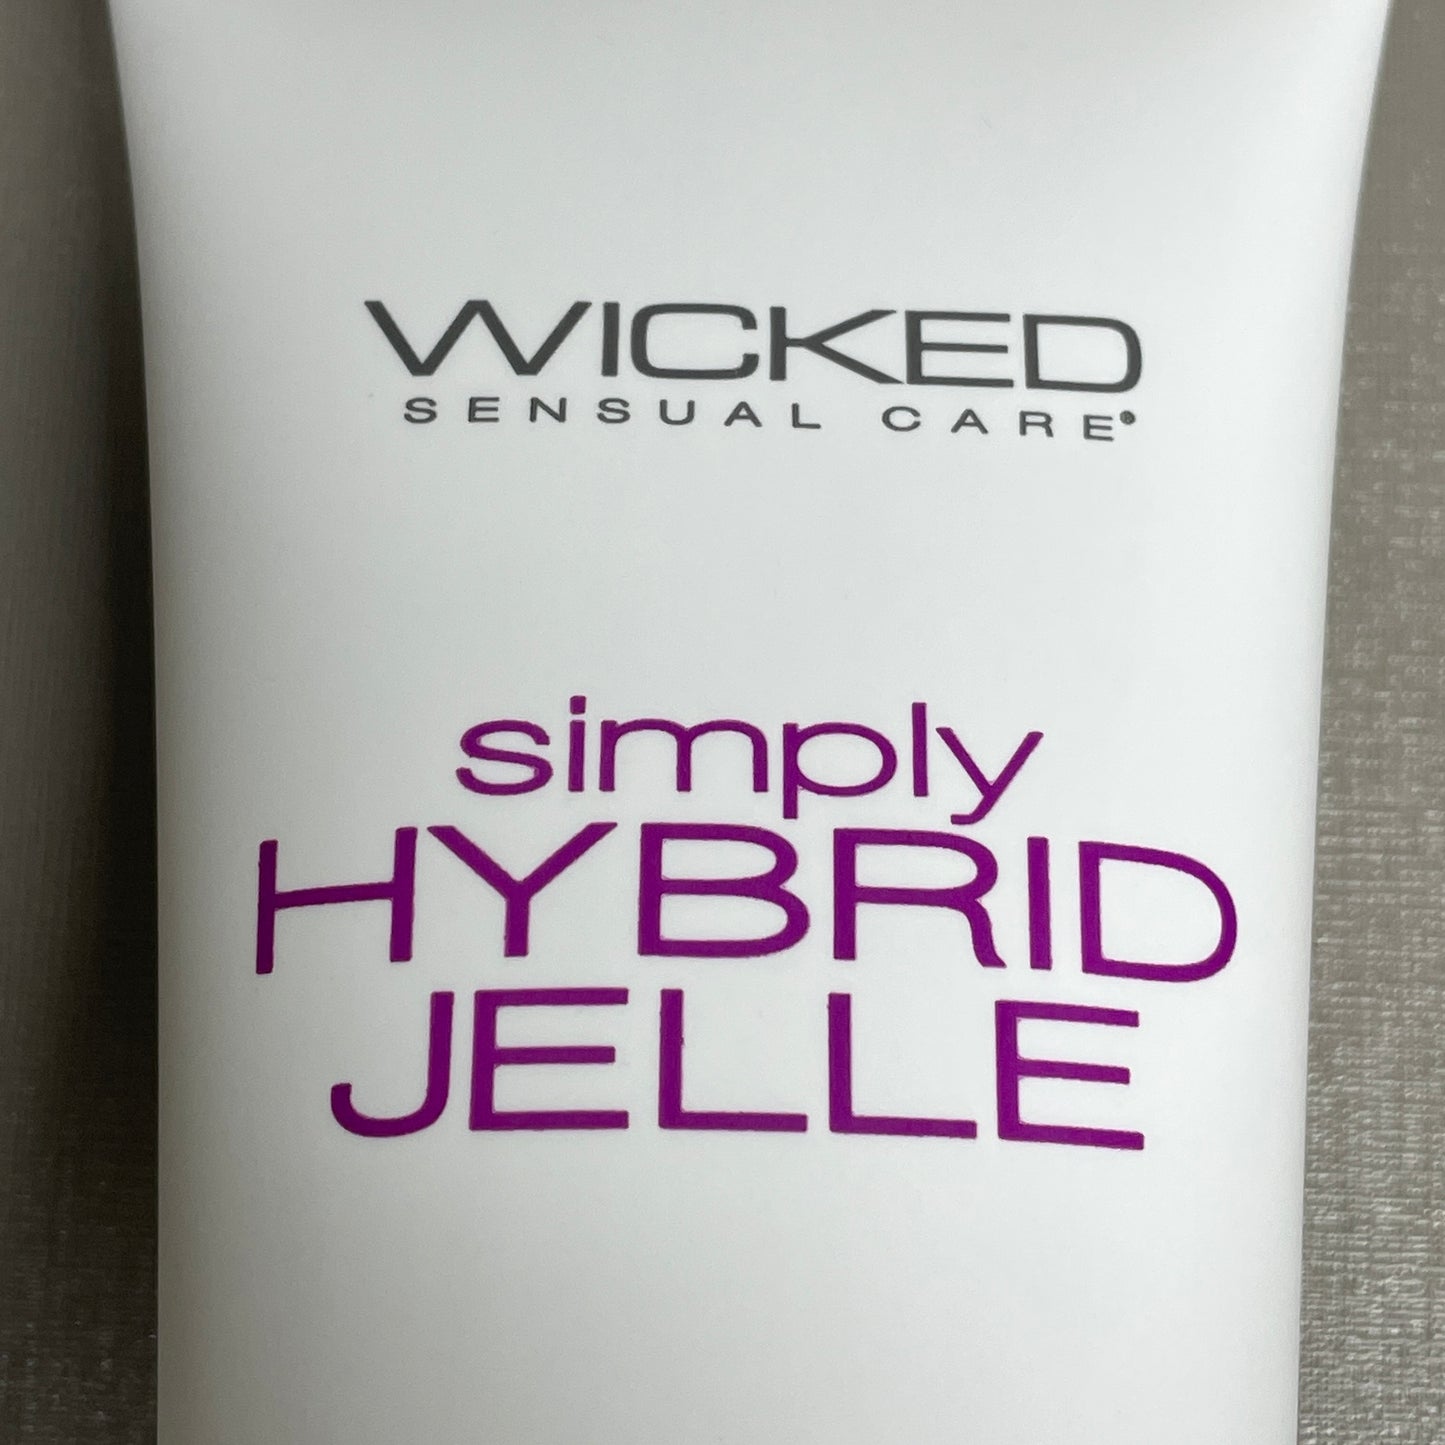 WICKED SENSUAL CARE Simply Hybrid Jelle Clean & Simple Water & Silicone Blended Gel Lubricant 4 oz Exp. 09/24 (New)